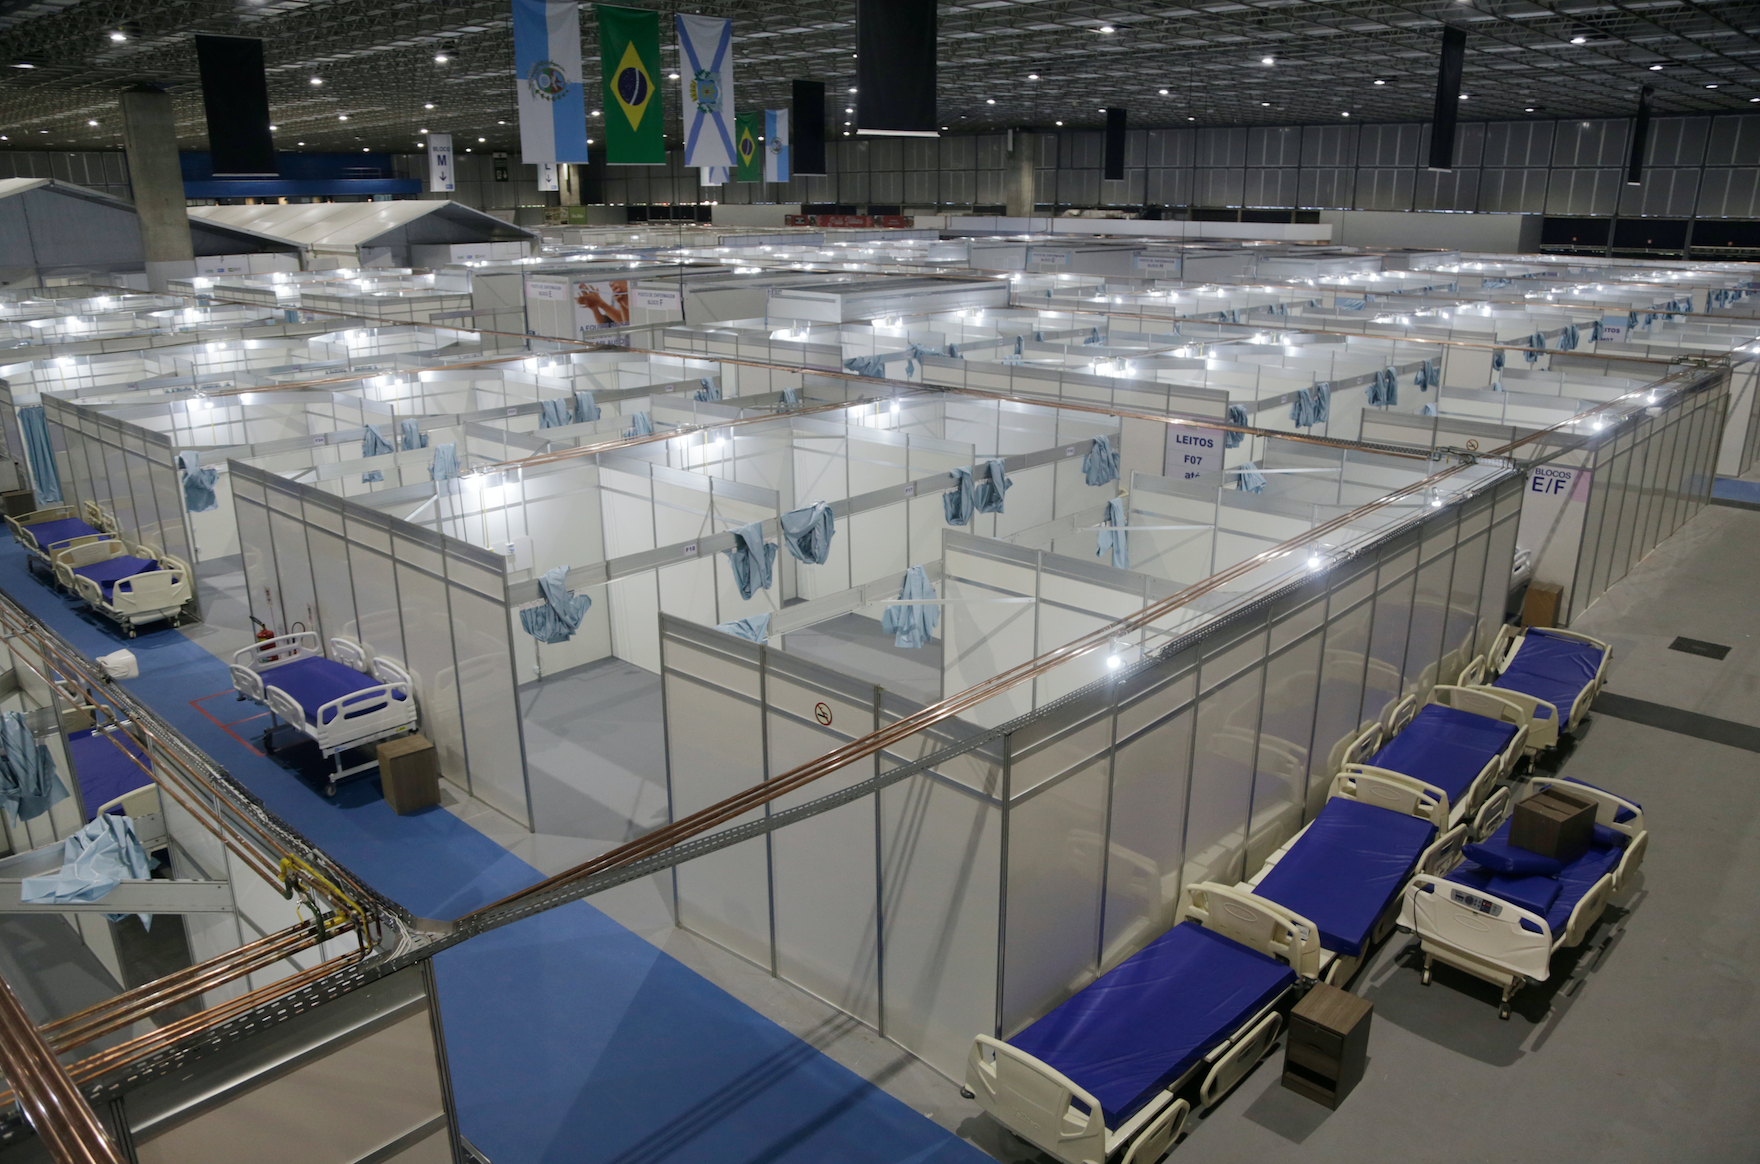 Rio de Janeiro, Brazil. April 29, 2020. An overview of an emergency field hospital is seen at Riocentro to receive COVID-19 patients. Image by Antonio Scorza / Shutterstock. Brazil, 2020.